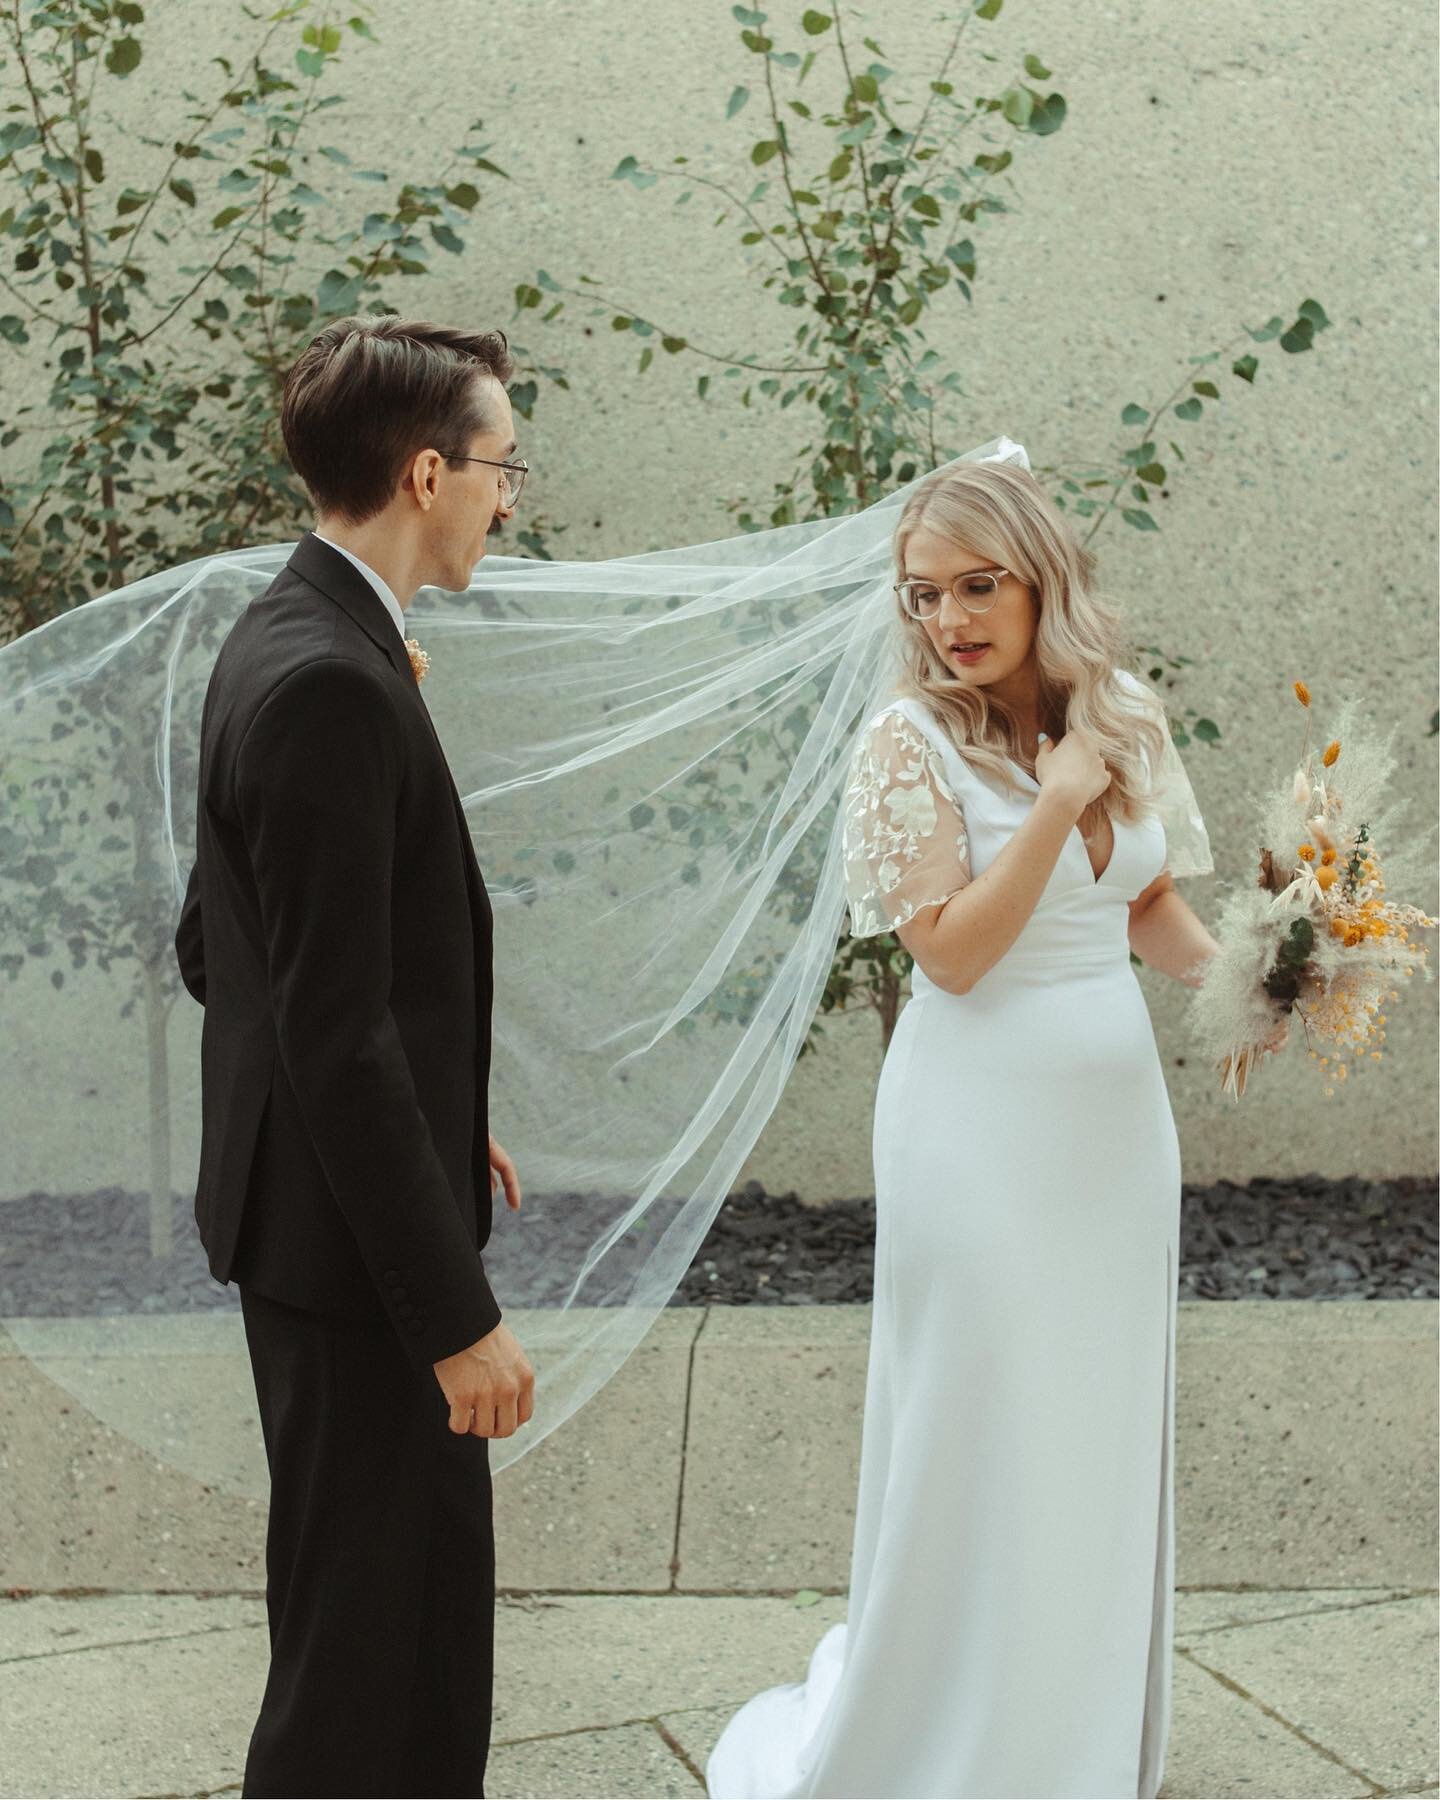 Capture Your Special Day with Timeless Elegance✨

Your love story is unique, beautiful, and deserves to be captured in the most exquisite way. If you're searching for a wedding photographer who can turn your special moments into timeless memories, yo